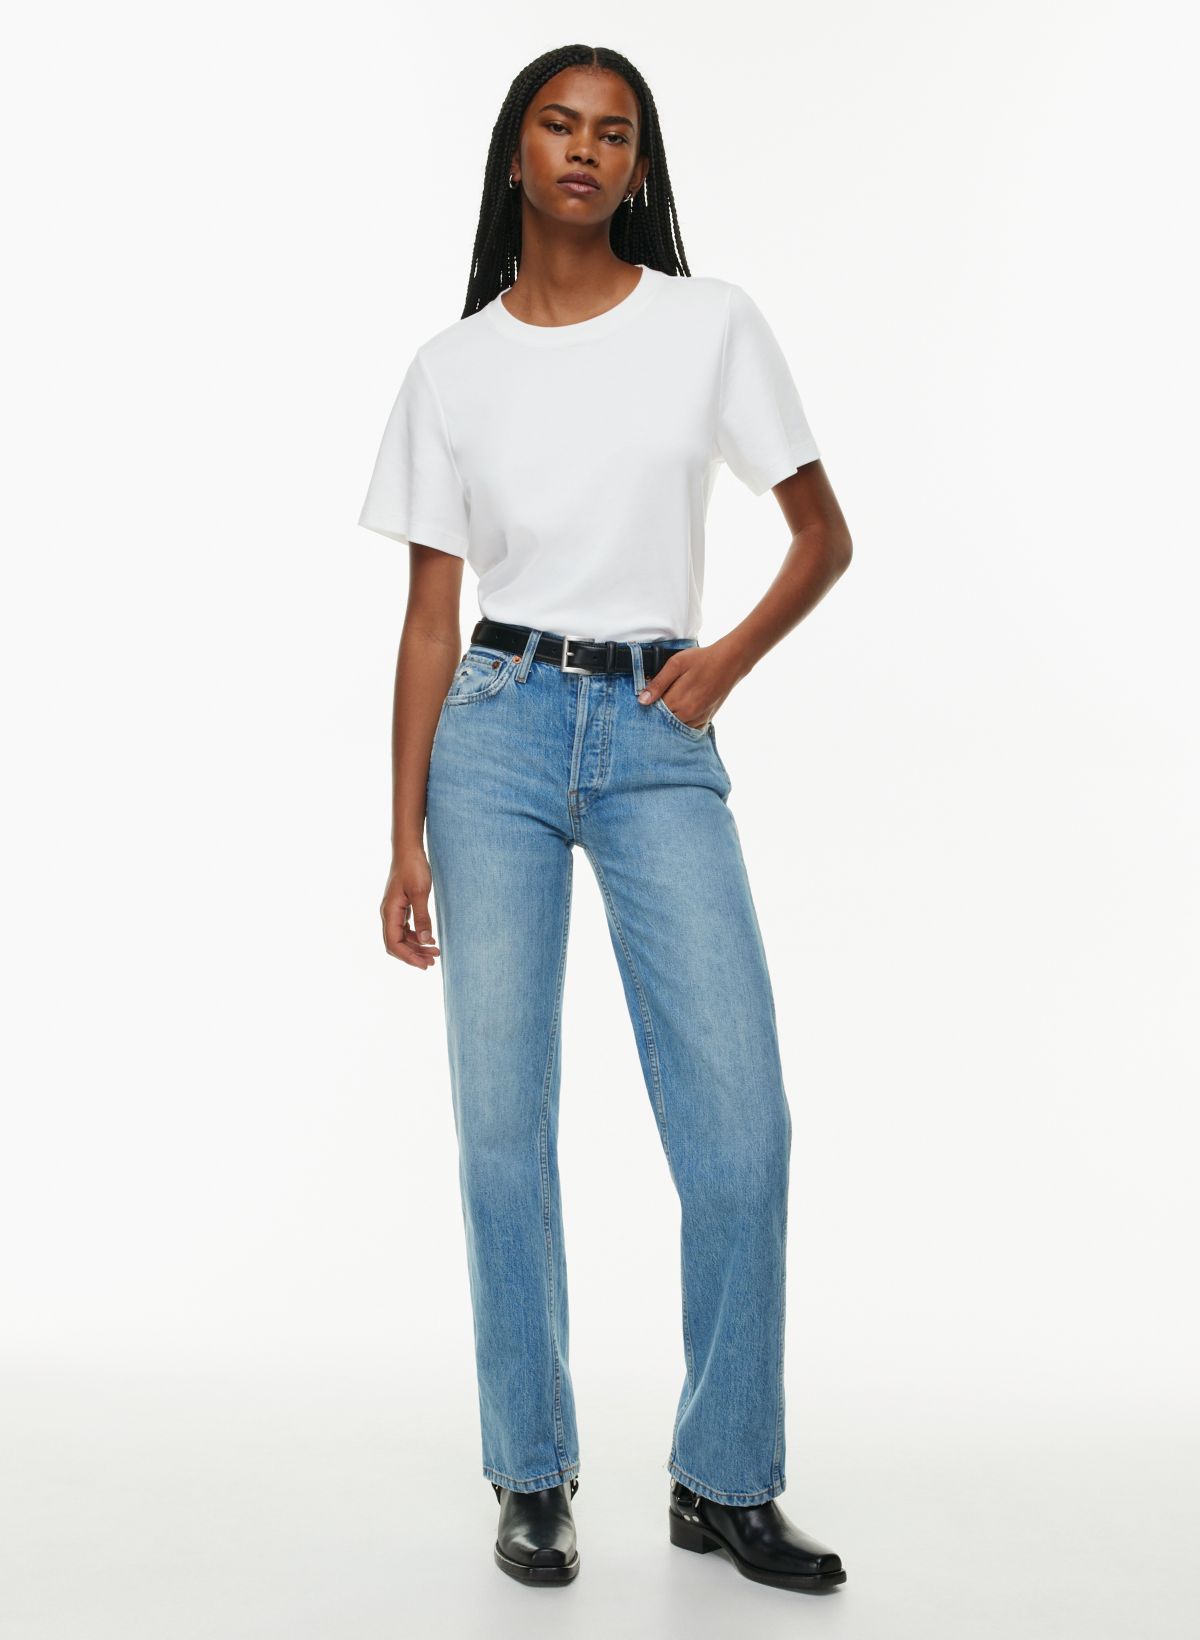 RE/DONE 90's High Rise Ankle Crop, Size 29